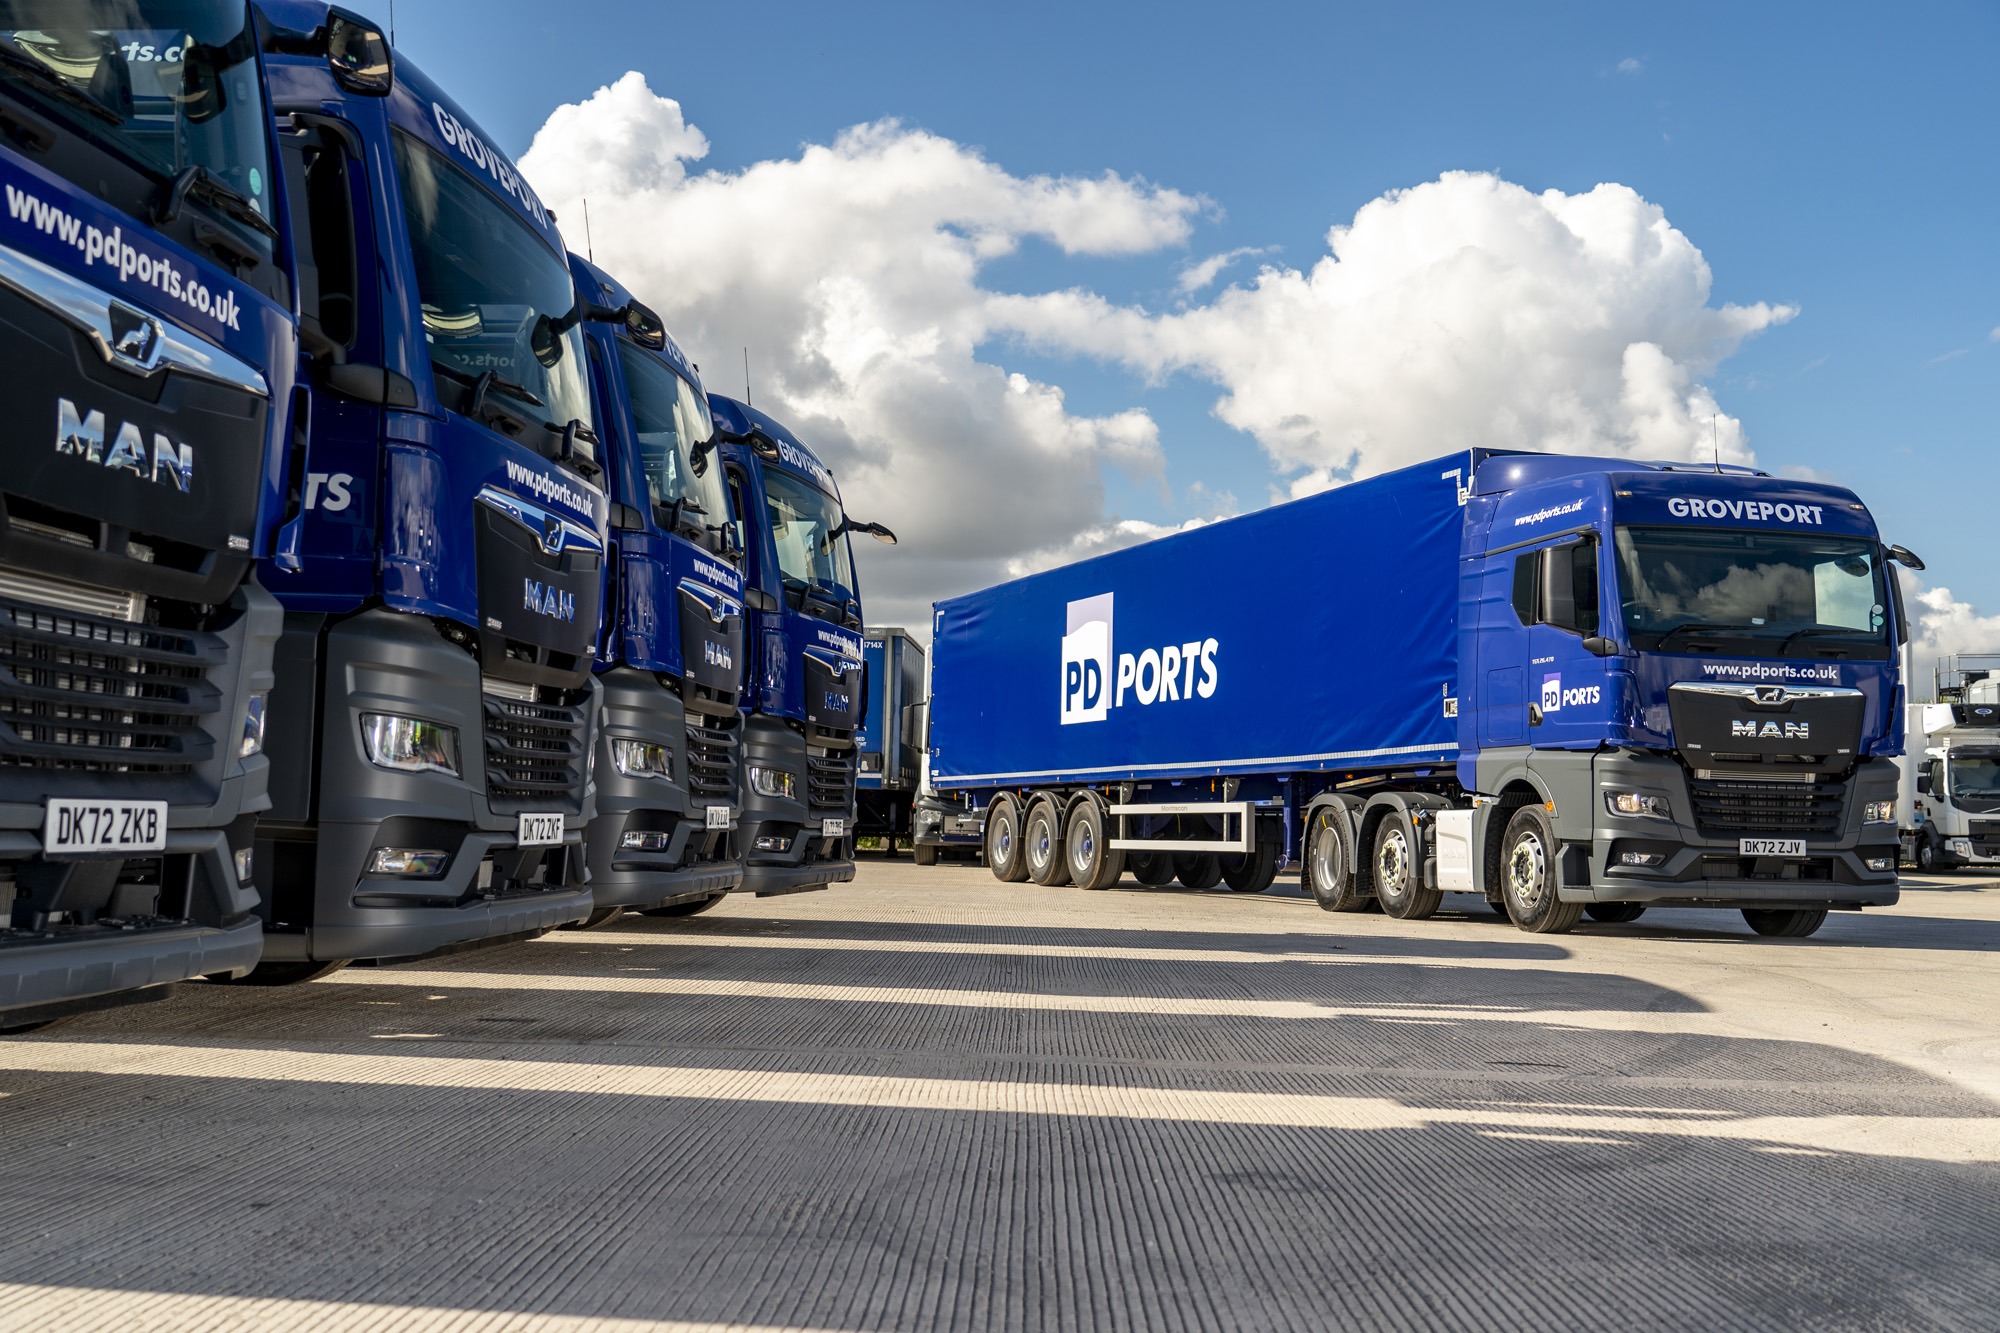 PD Ports new tractors from Dawsongroup truck and trailer